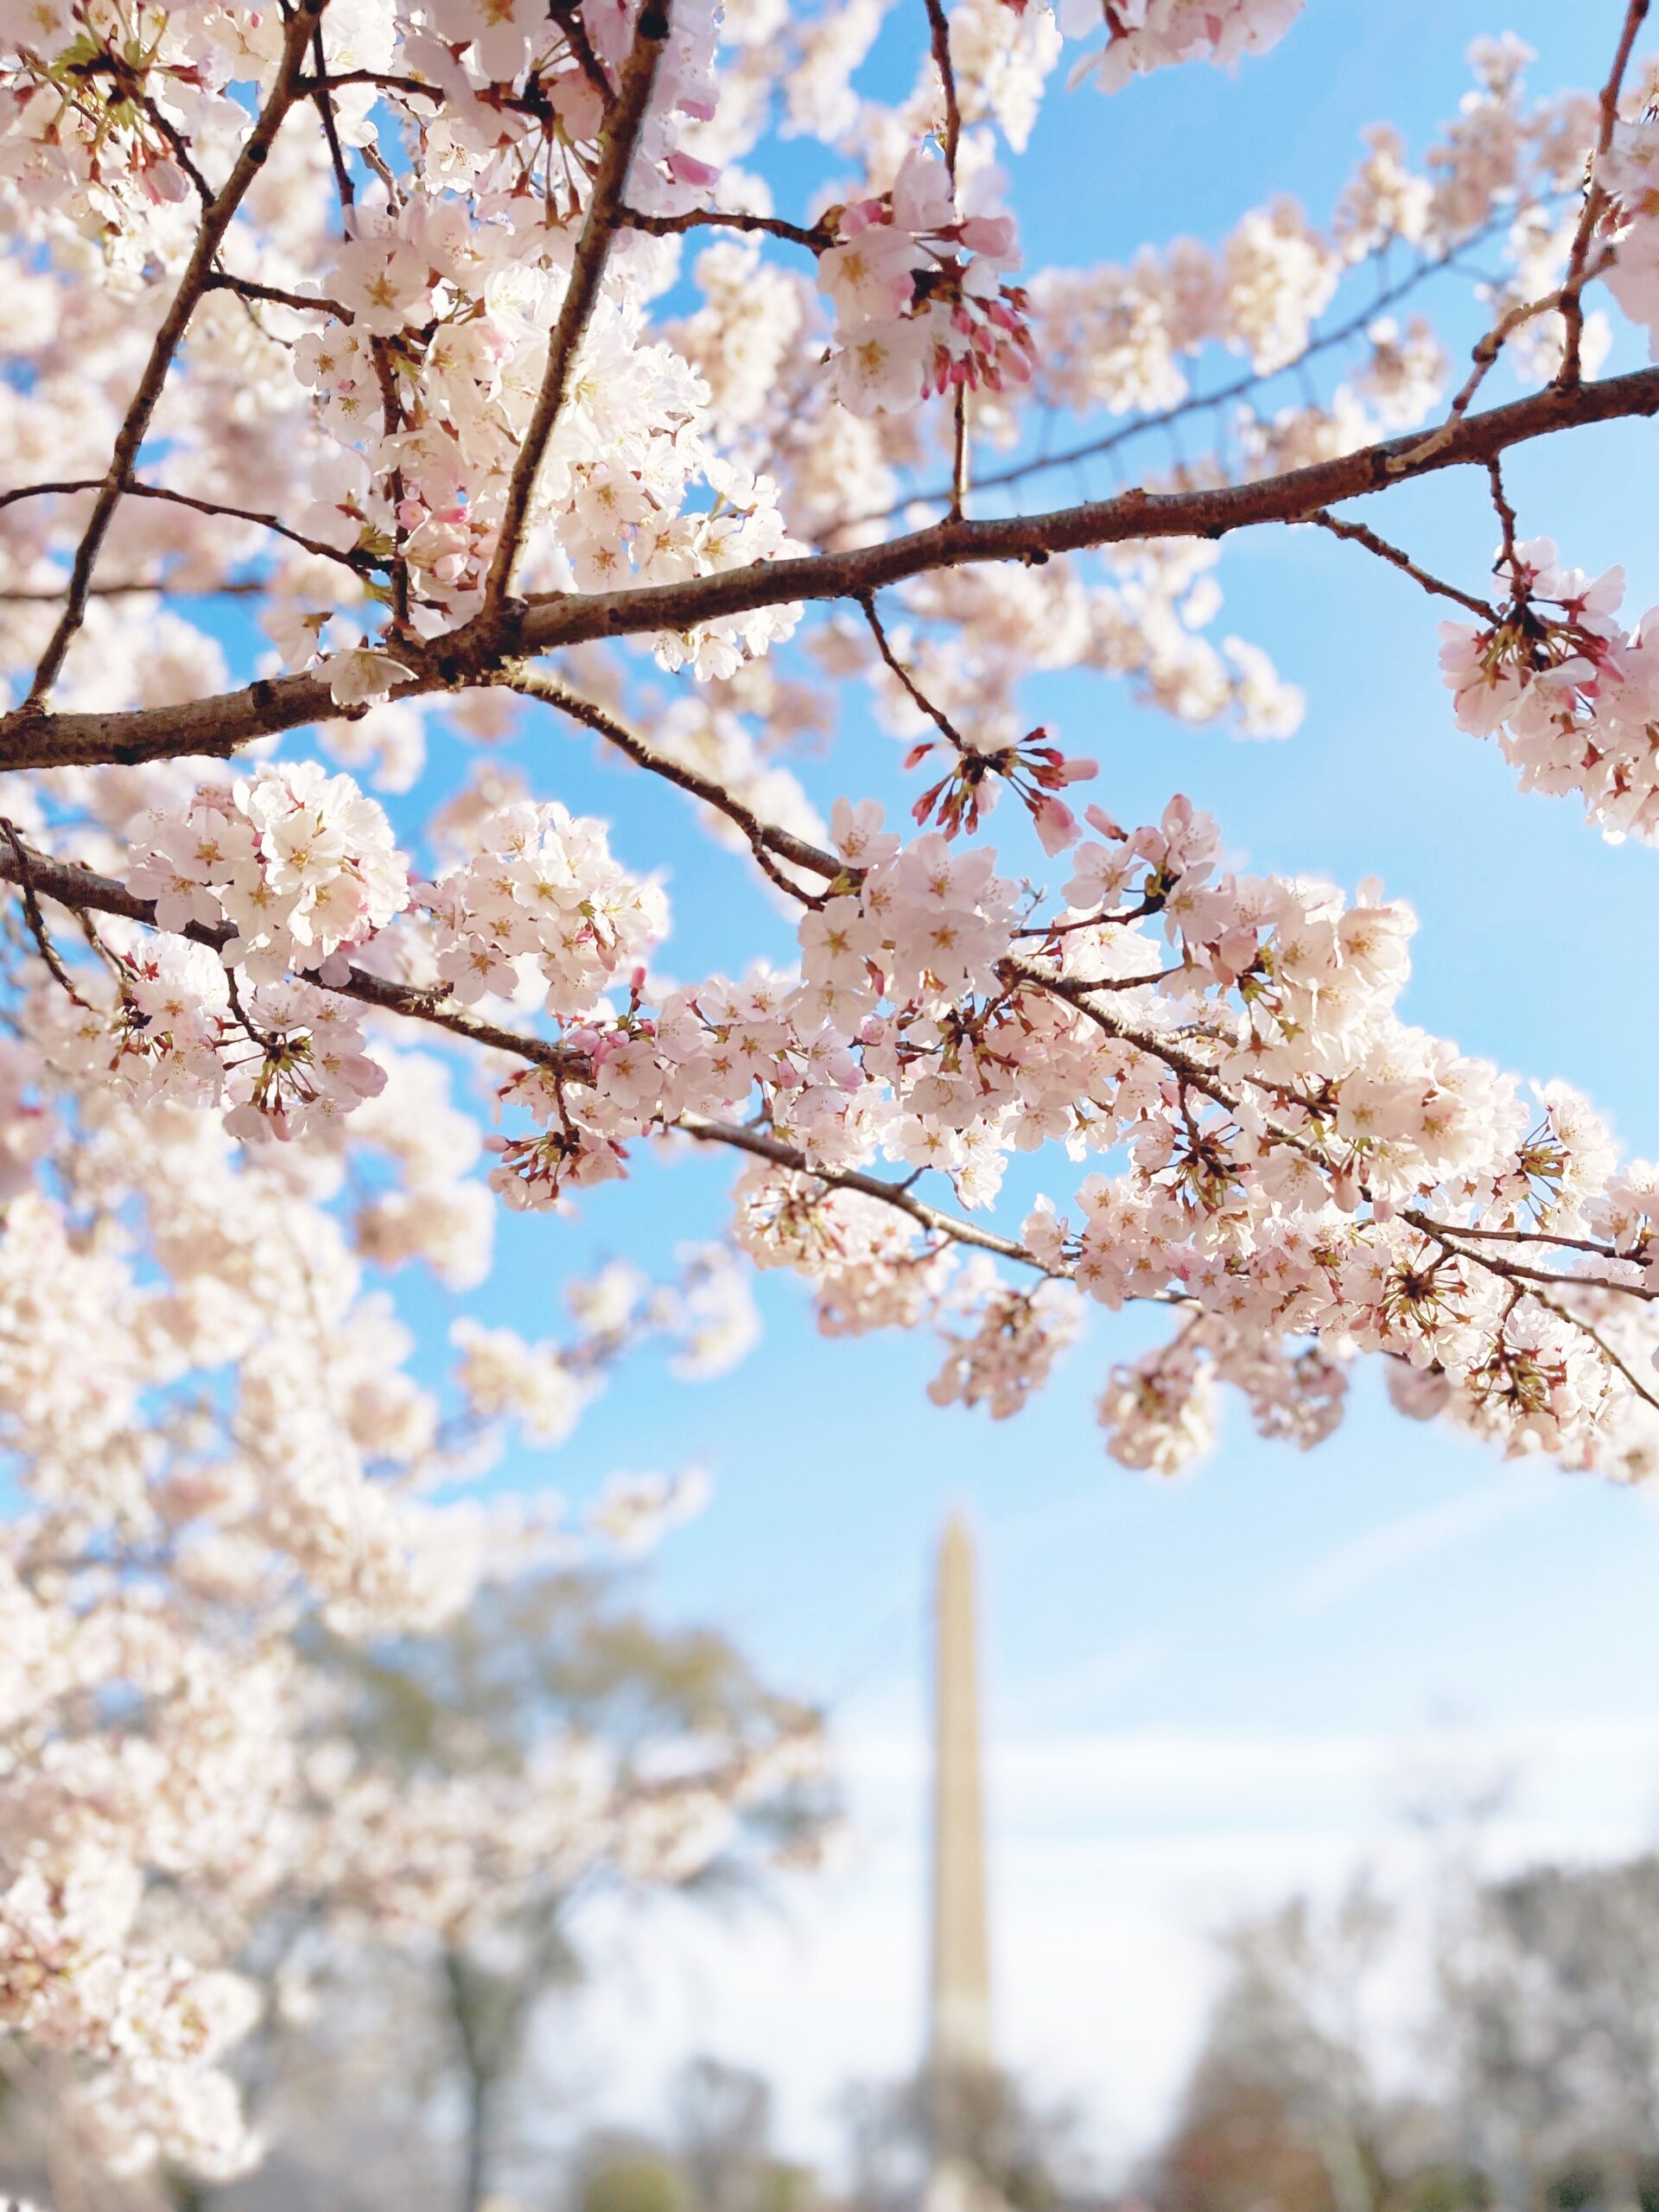 Cherry Blossoms in DC - Washington Monument